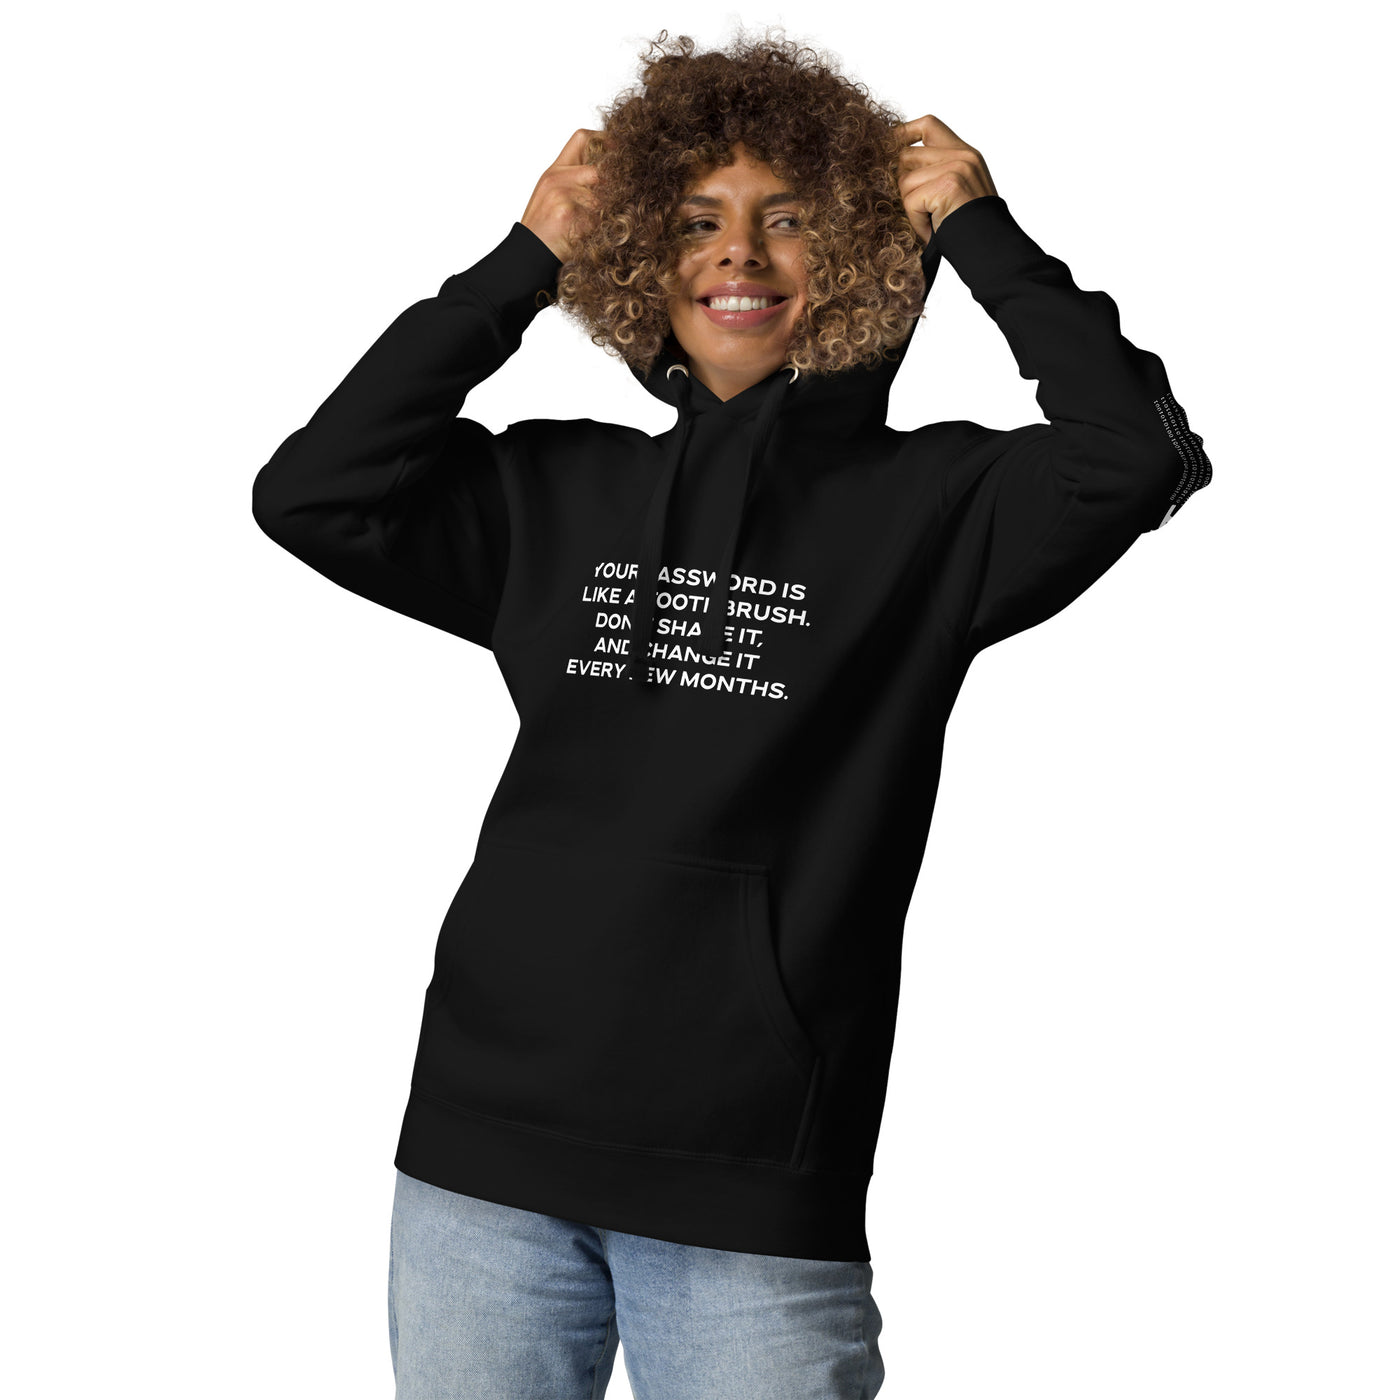 Your password is like a toothbrush V2 - Unisex Hoodie